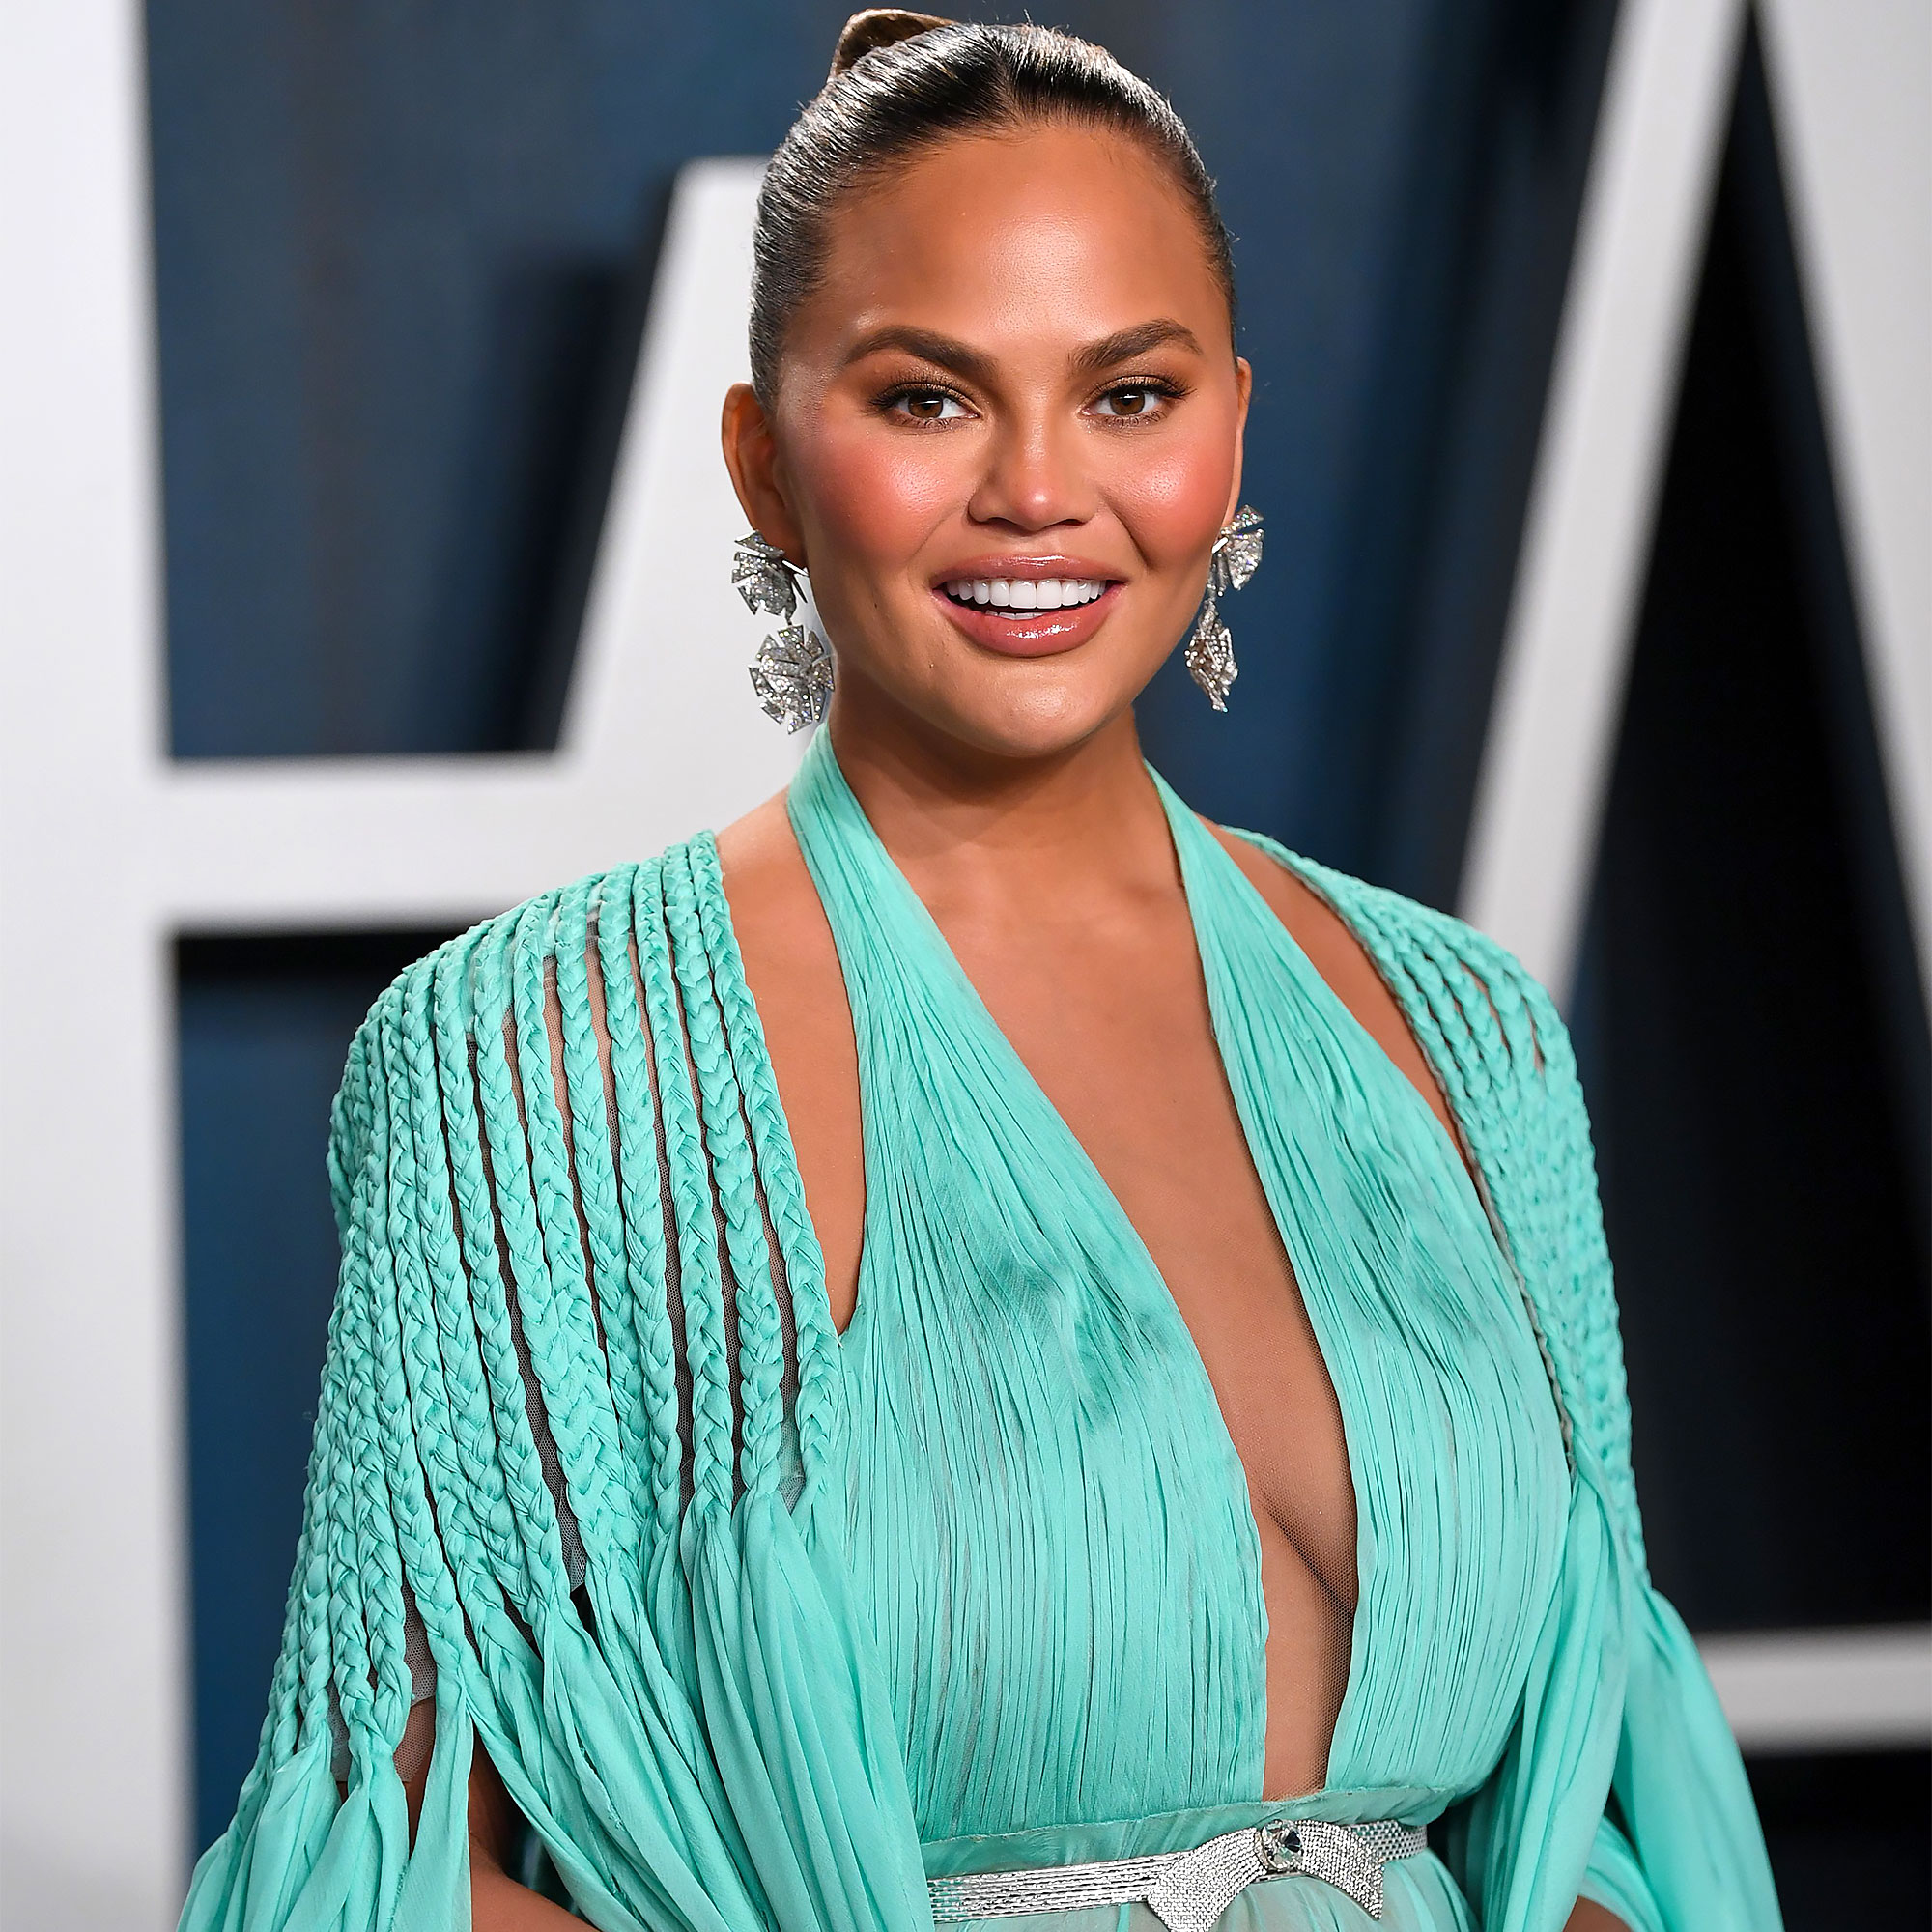 Chrissy Teigen Reveals Results of 'Fat Removal' Face Surgery: Photo